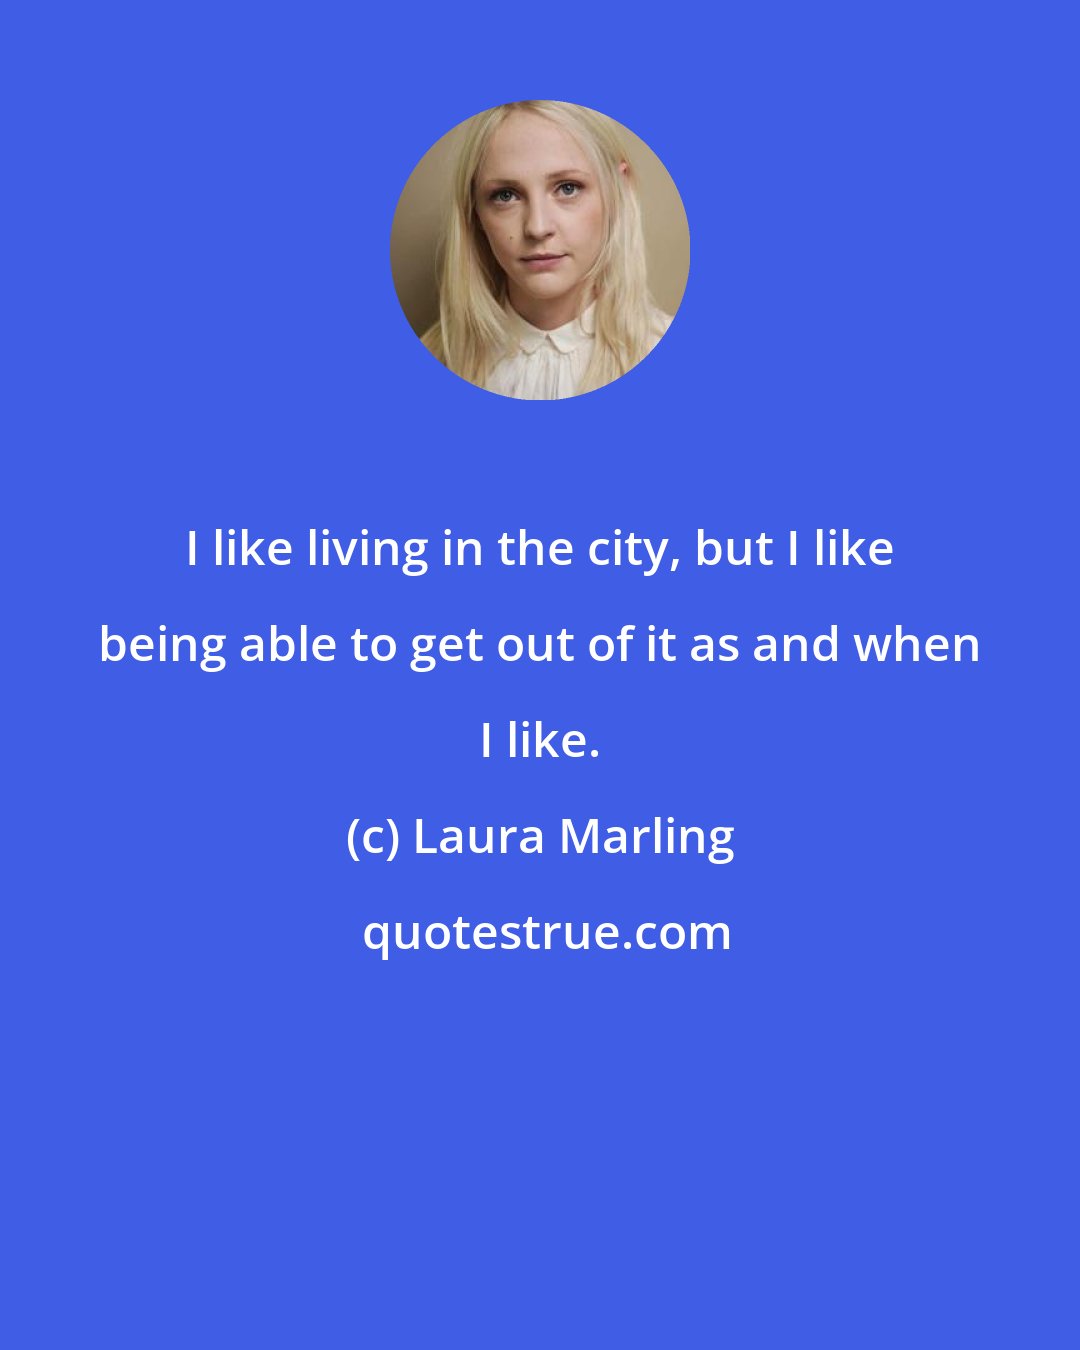 Laura Marling: I like living in the city, but I like being able to get out of it as and when I like.